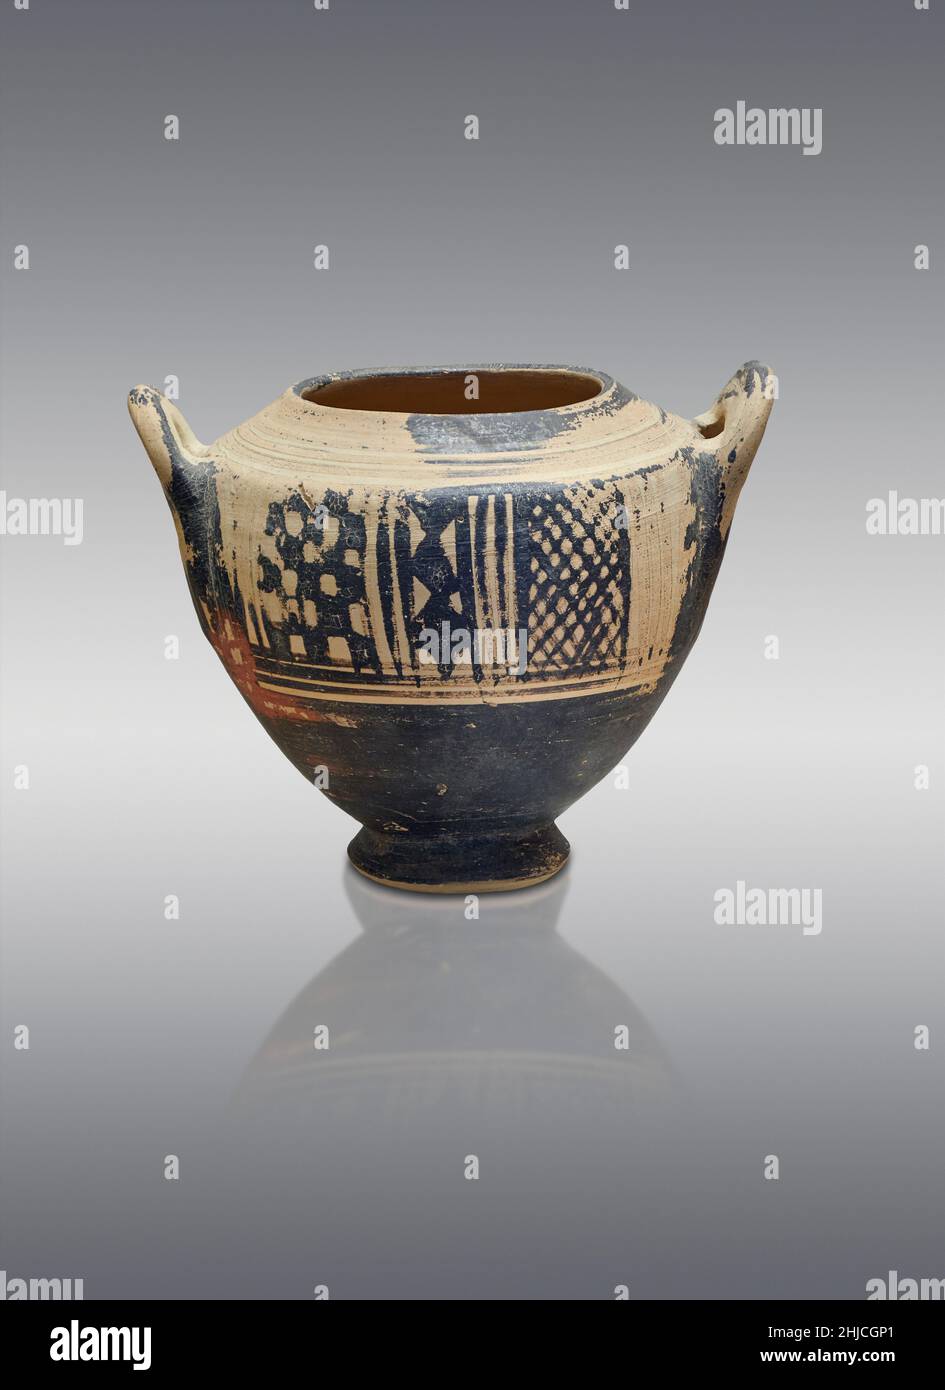 Mycenaean pottery - Terracotta Pyxis  with geometric designs, Tiryns grave 1974.11, 1025-900 BC. Nafplion Archaeological Museum.  Against grey backgro Stock Photo